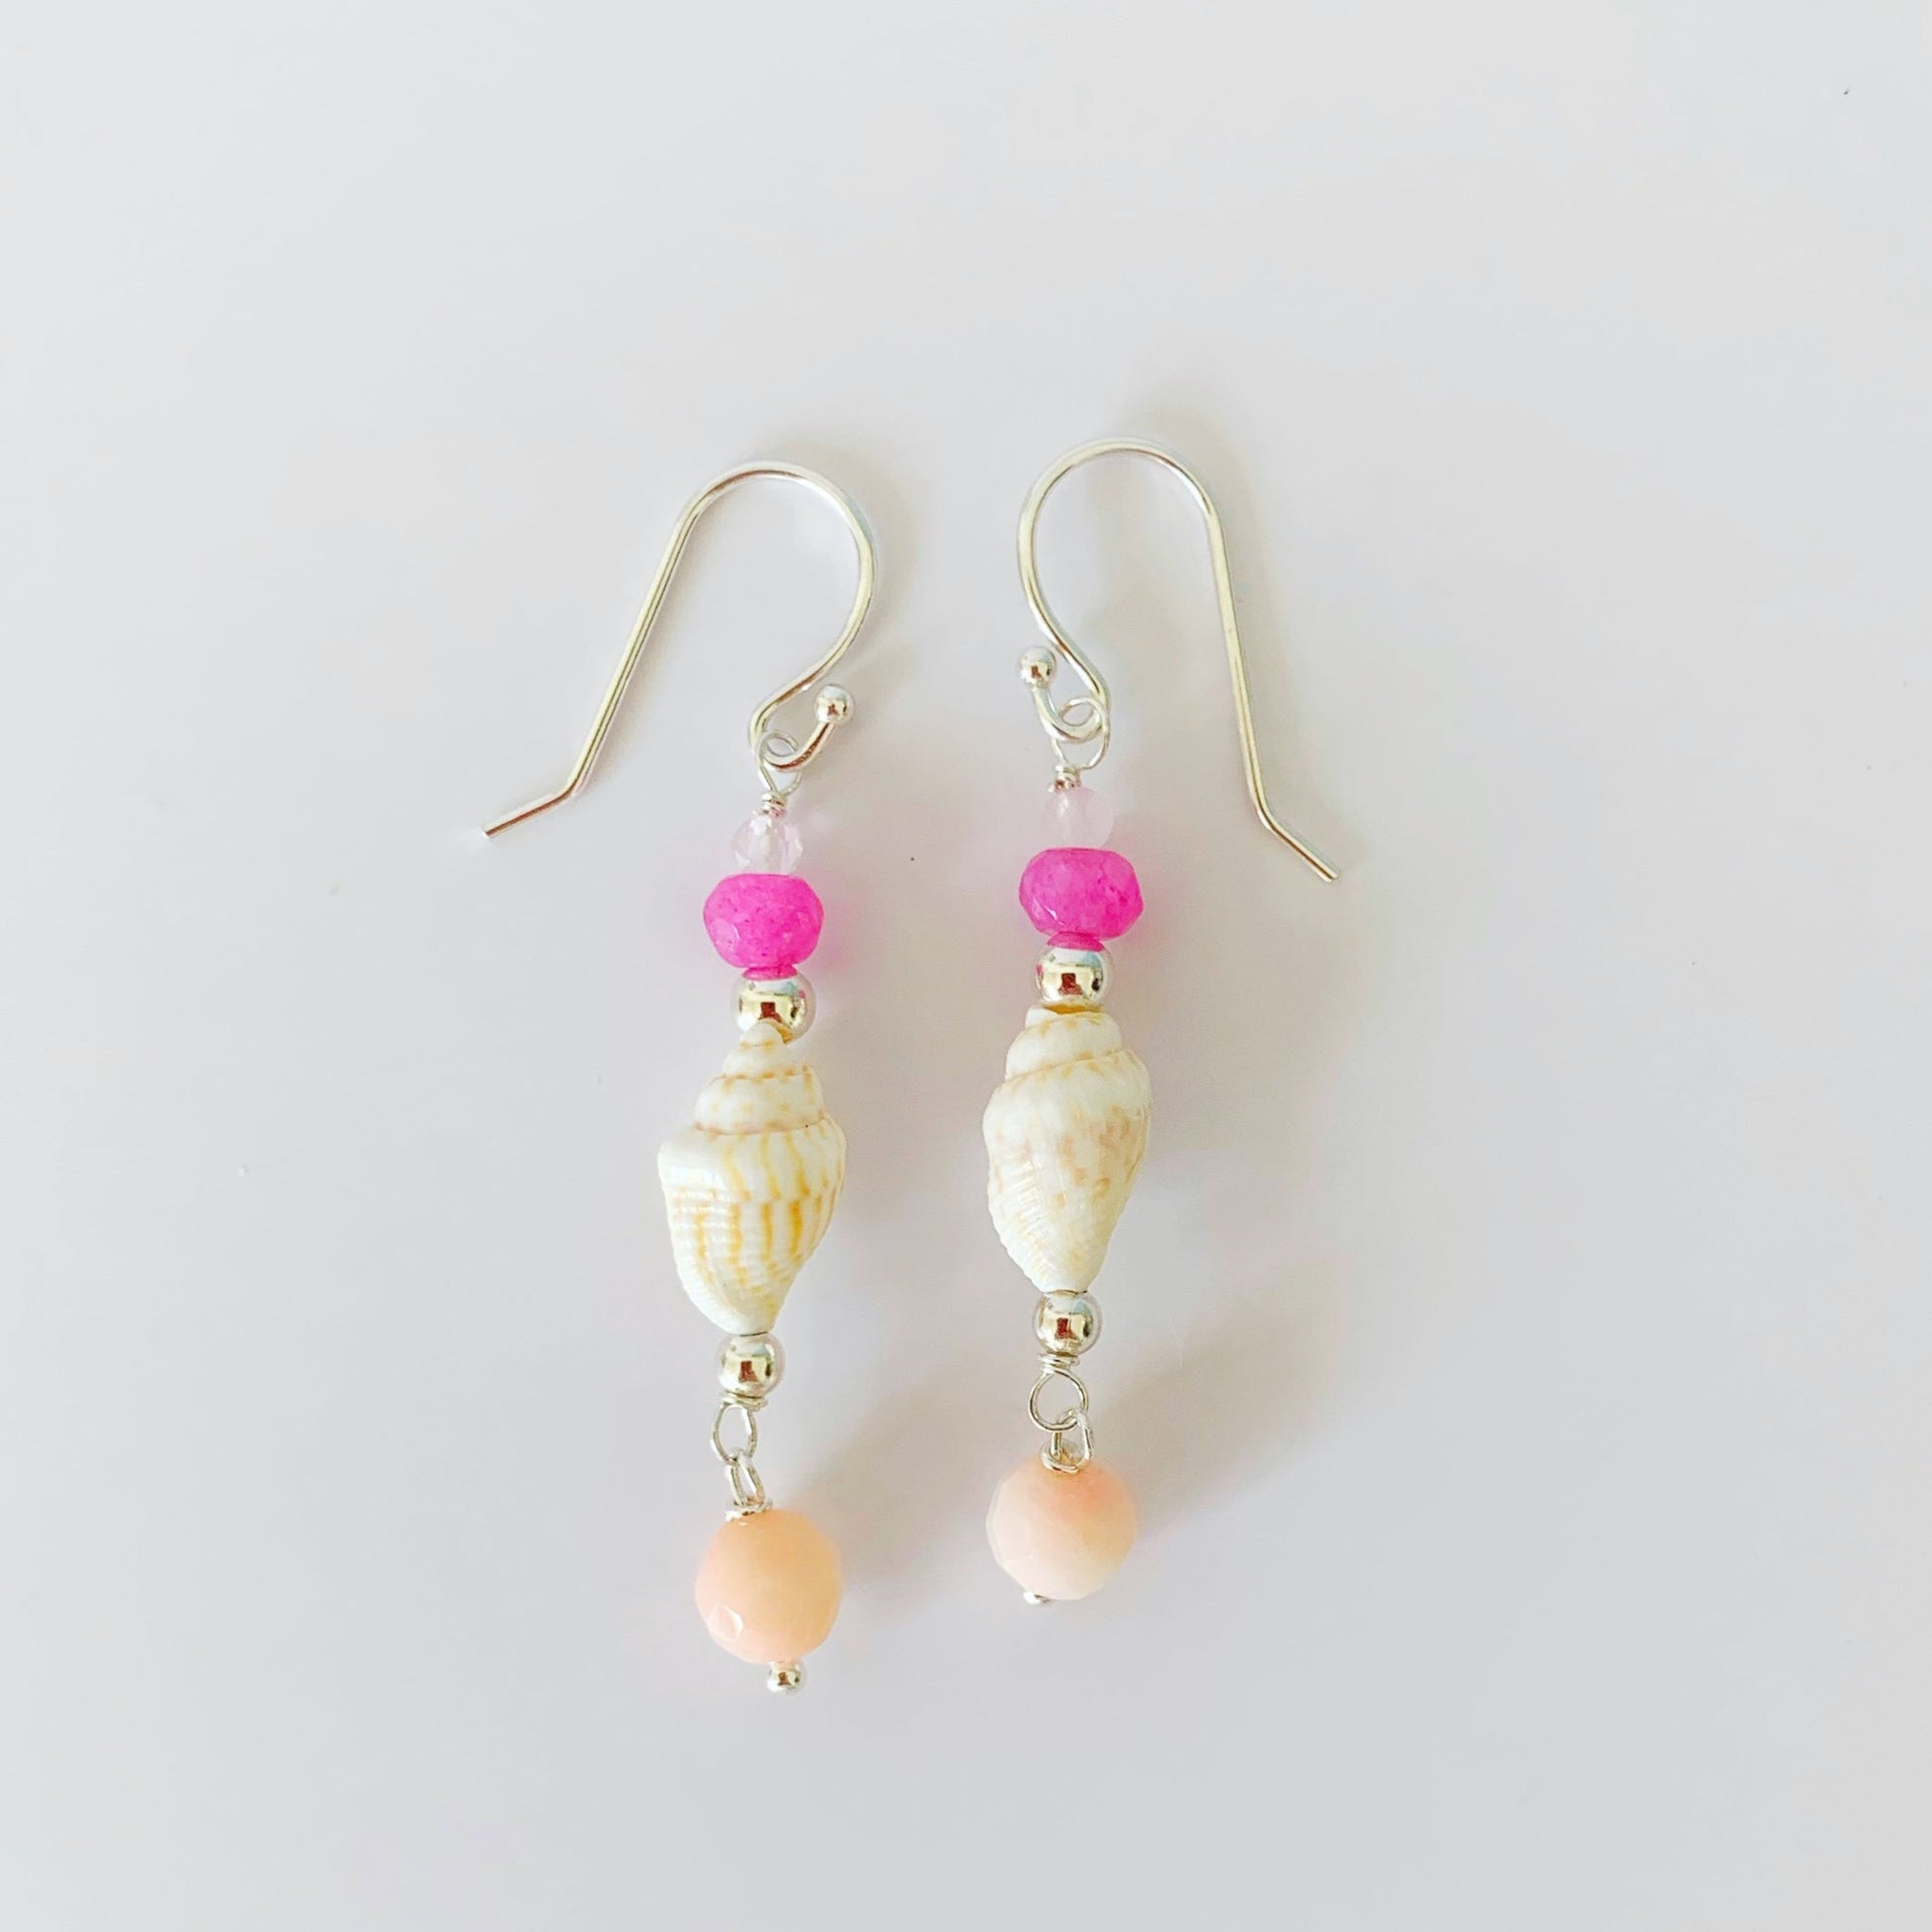 The pink flamingo shellebration earrings by mermaids and madeleines are a linear drop earring featuring a shell at the center complimented by dyed pink jade, rose quartz and a coral drop bead all with sterling silver findings. this pair is photographed on a white surface.